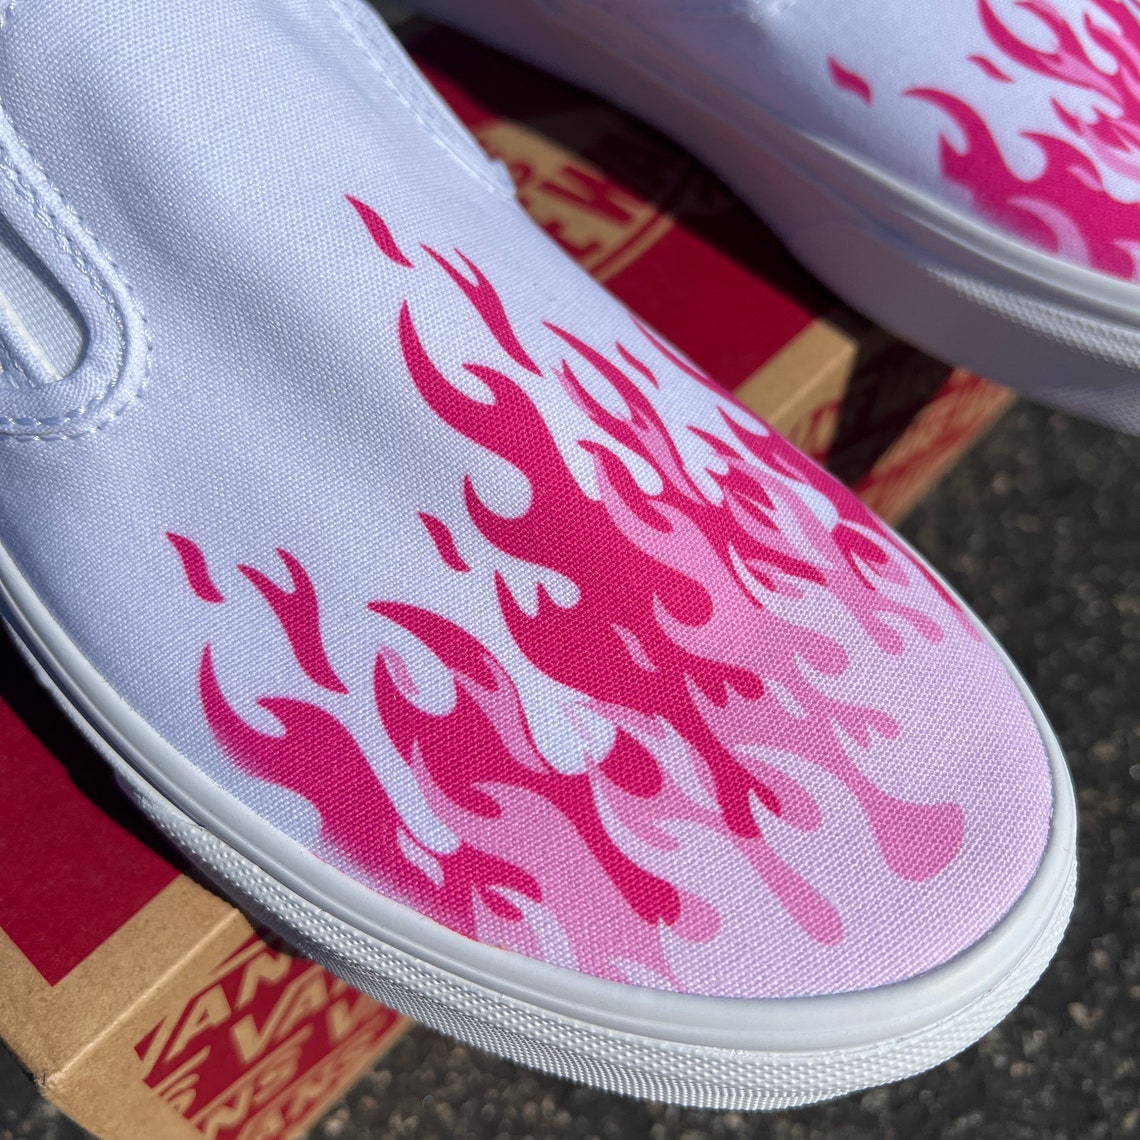 Hot Pink Flame Shoes for Women and Men Custom Vans White - Etsy